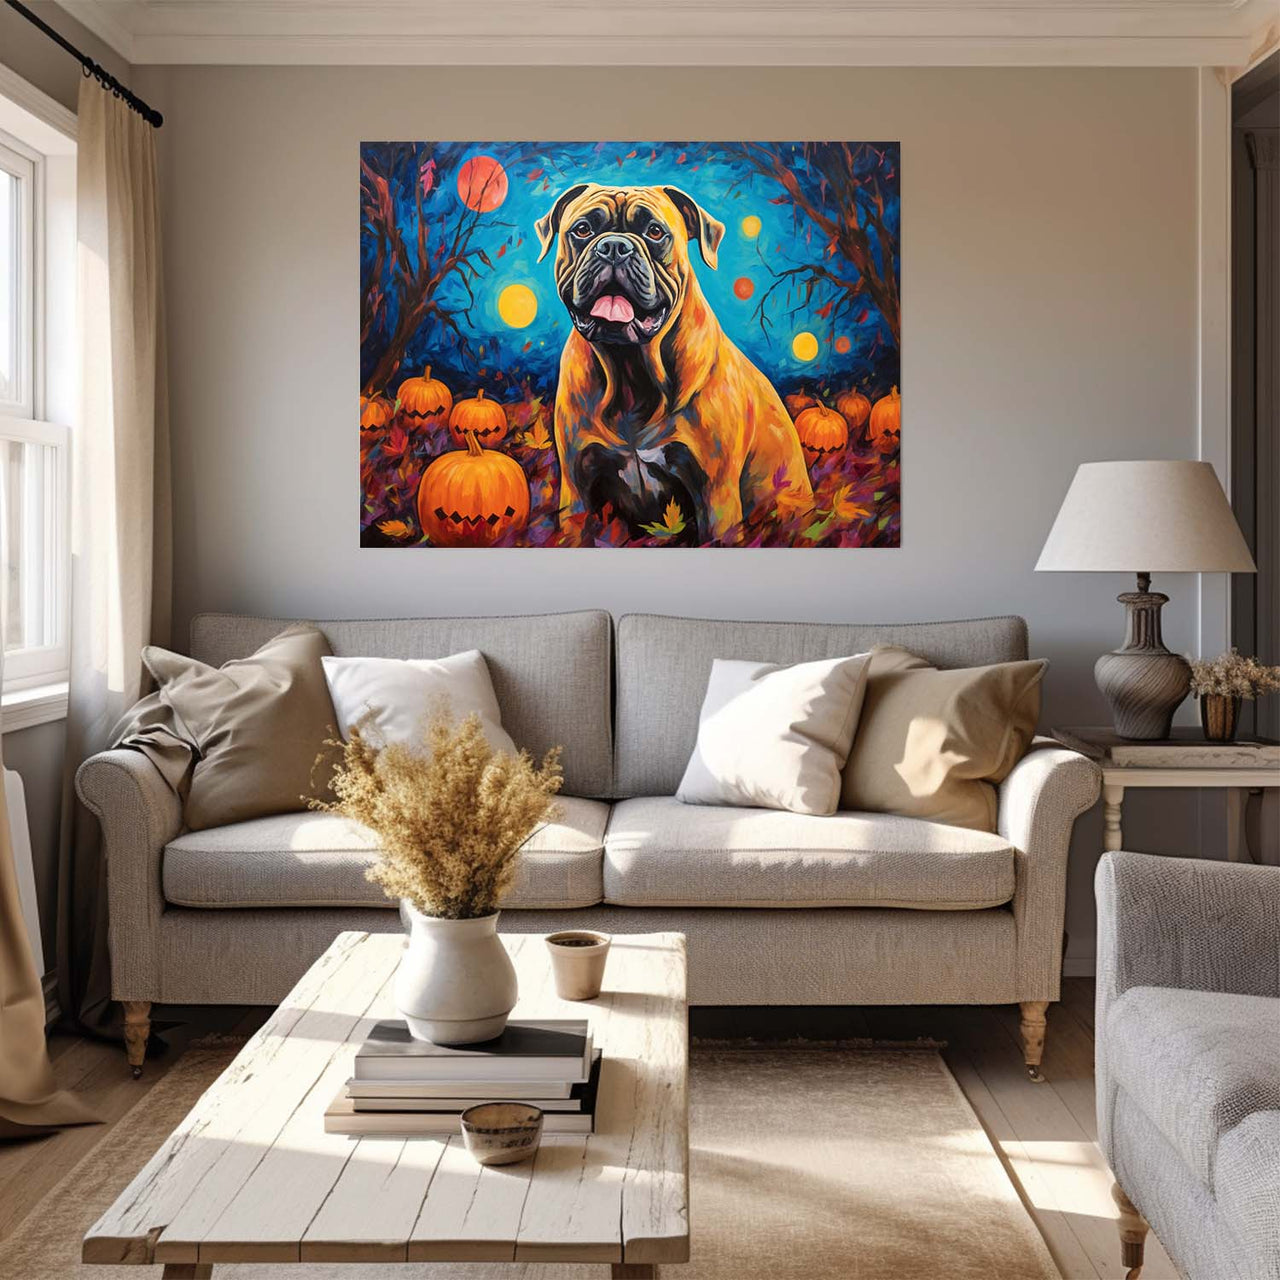 Cane Corso Dog 01 Halloween With Pumpkin Oil Painting Van Goh Style, Wooden Canvas Prints Wall Art Painting , Canvas 3d Art